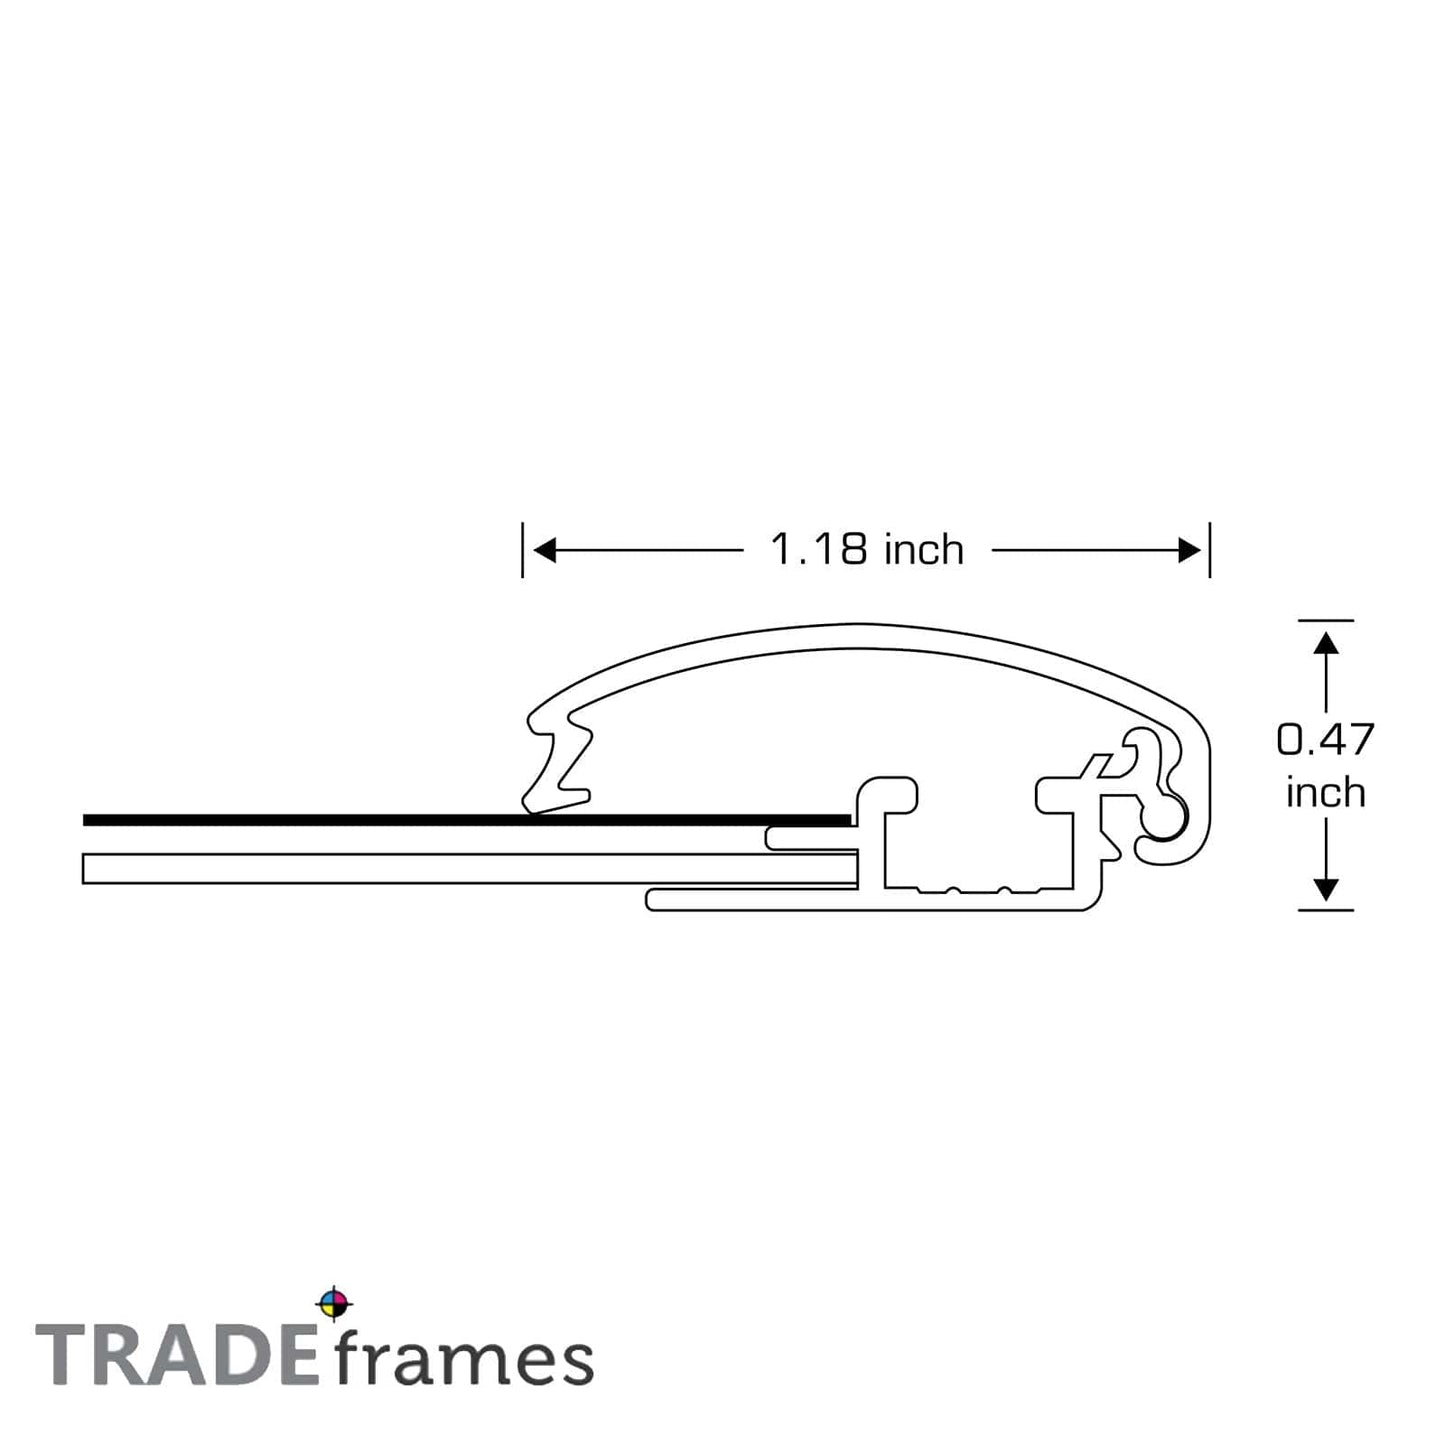 16x16 TRADEframe White Snap Frame 16x16 - 1.2 inch profile - Snap Frames Direct